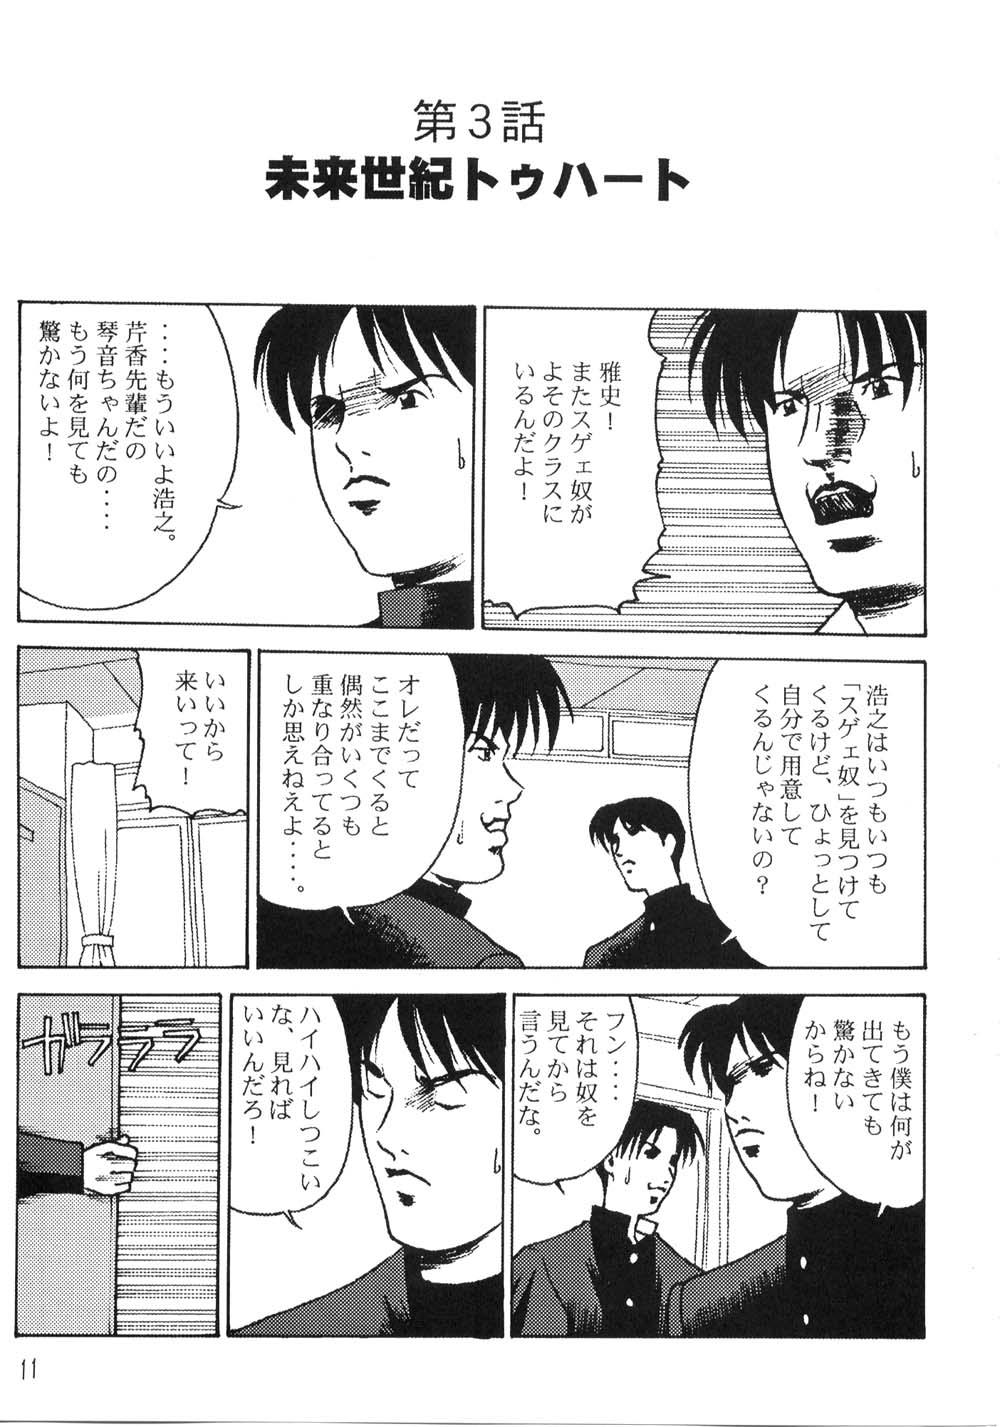 Jap Credit Note Vol. 5 - To heart Comic party Kizuato Teenfuns - Page 10